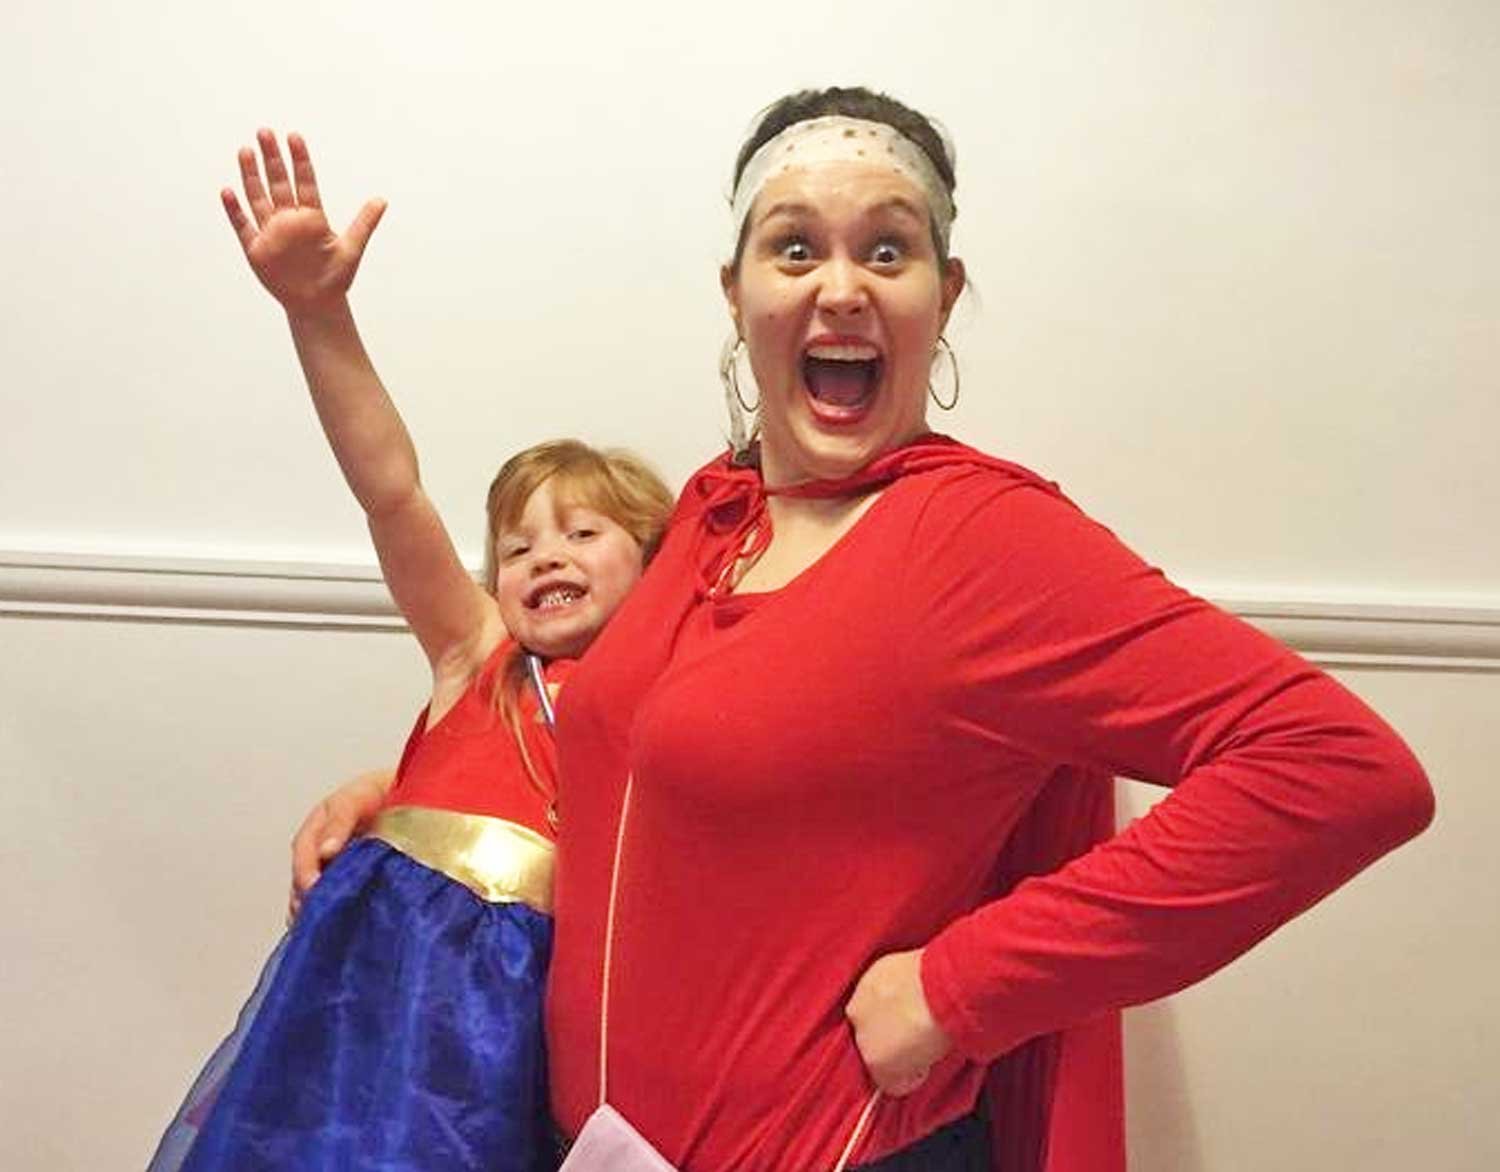 The Super Girl - Adventure Party Themes - Nutty's Children's Parties 8.jpg